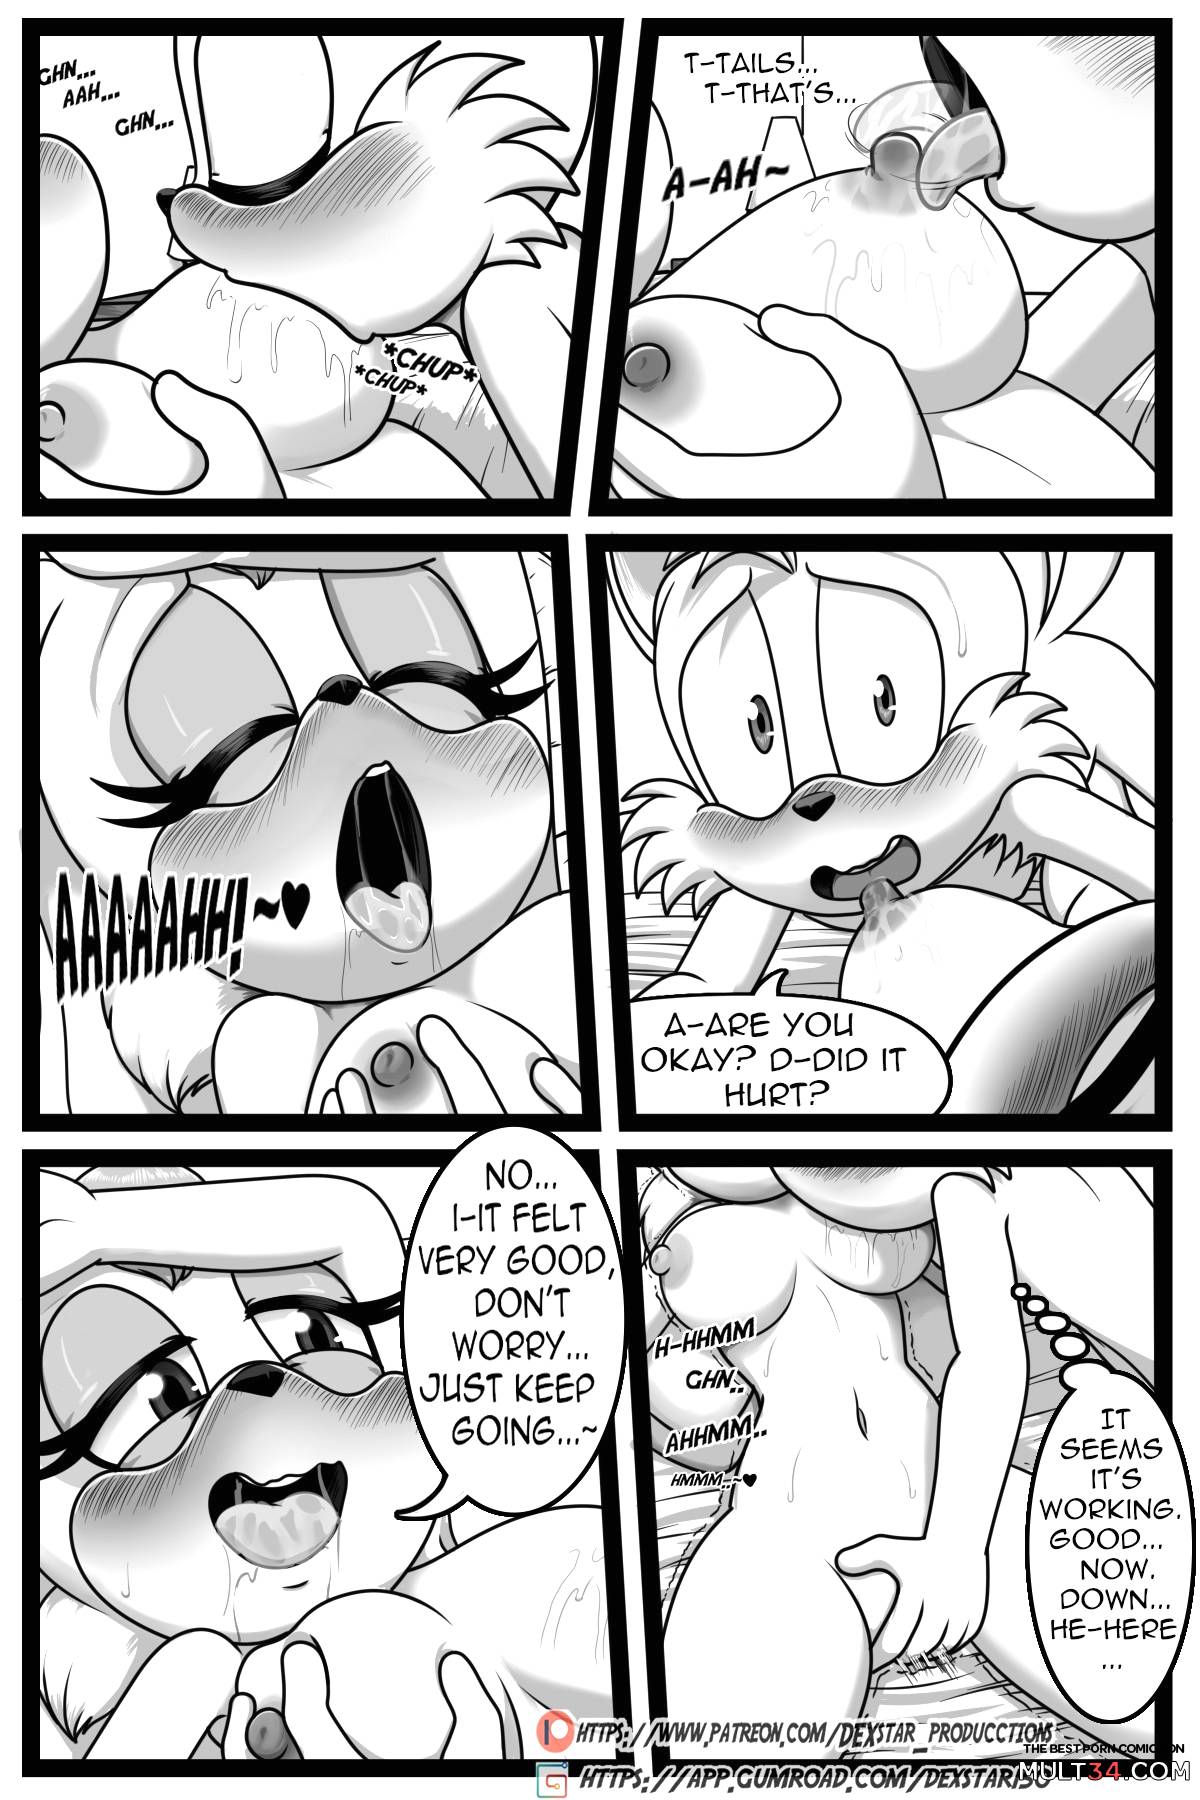 Please Fuck Me: Cream x Tail - Extra Story! page 11